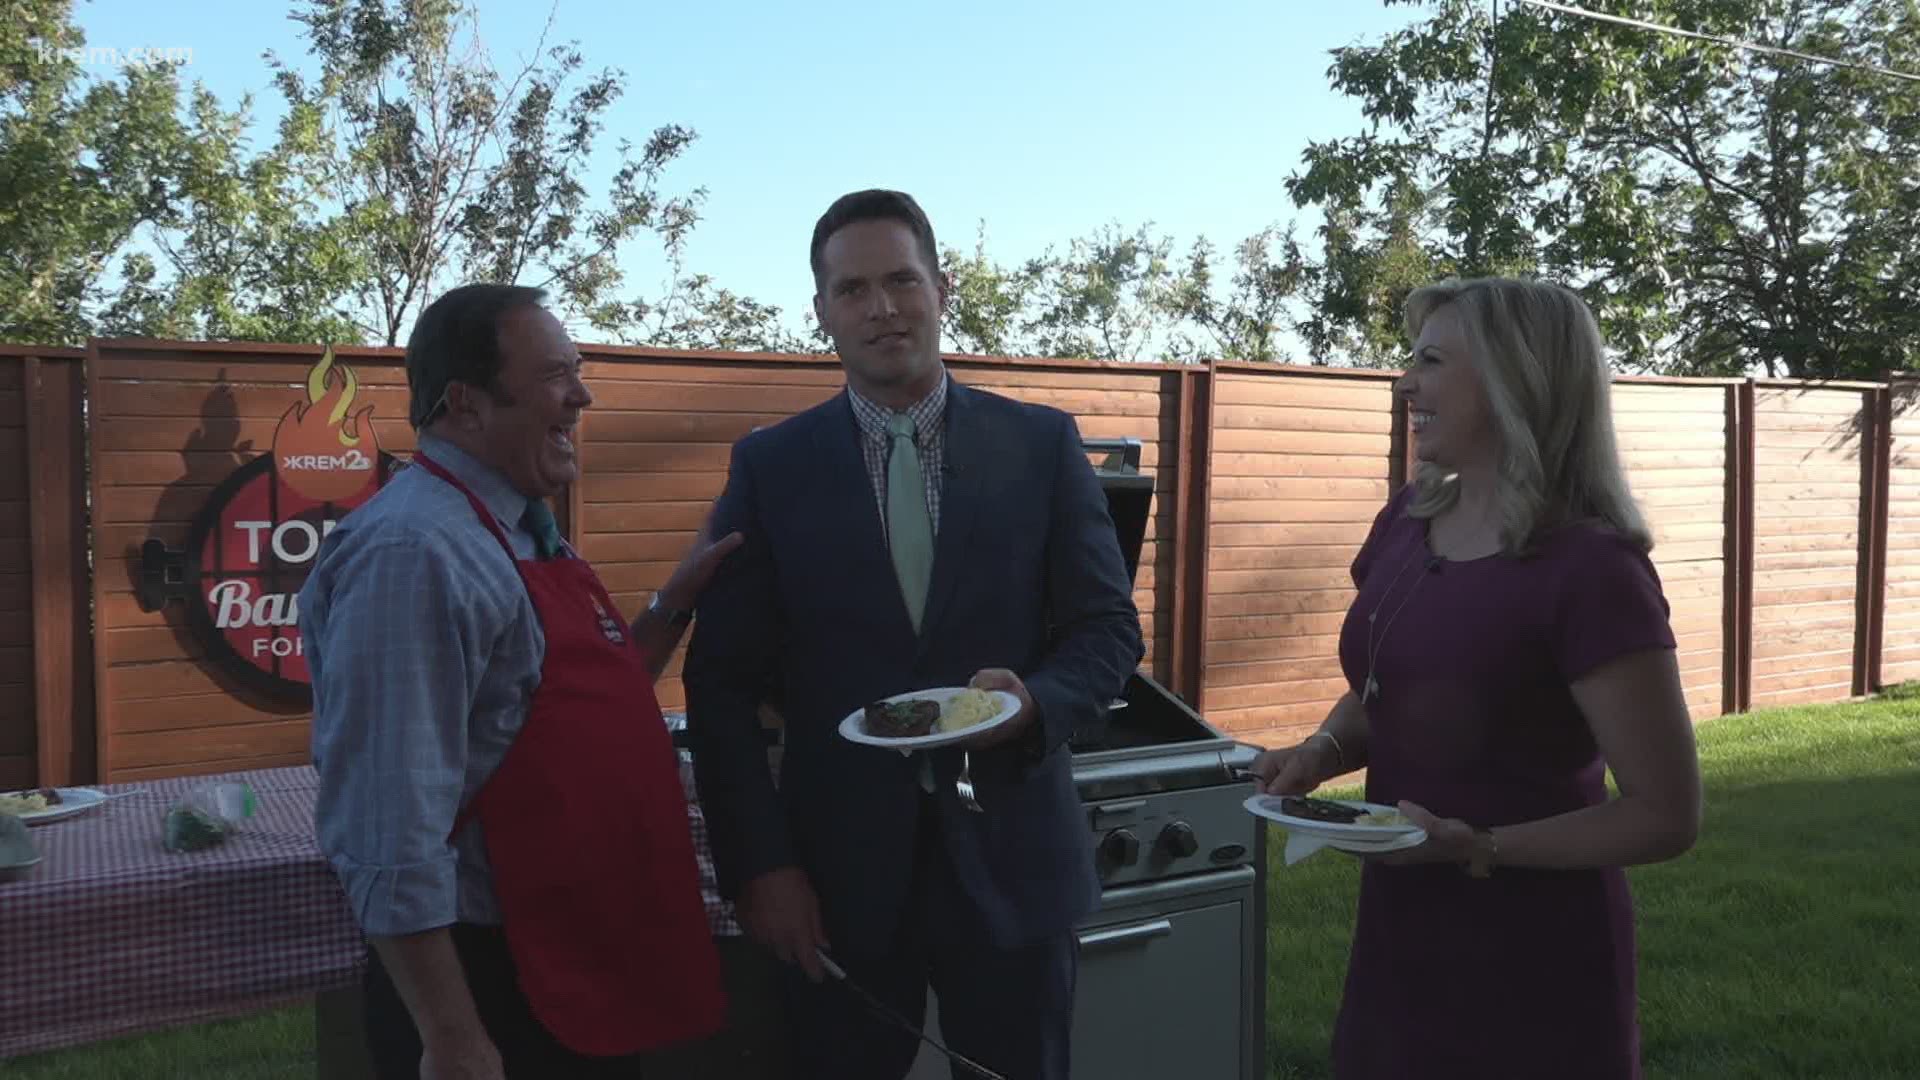 KREM's Tom Sherry has the weekday forecast and the recipe for his dish of the week.